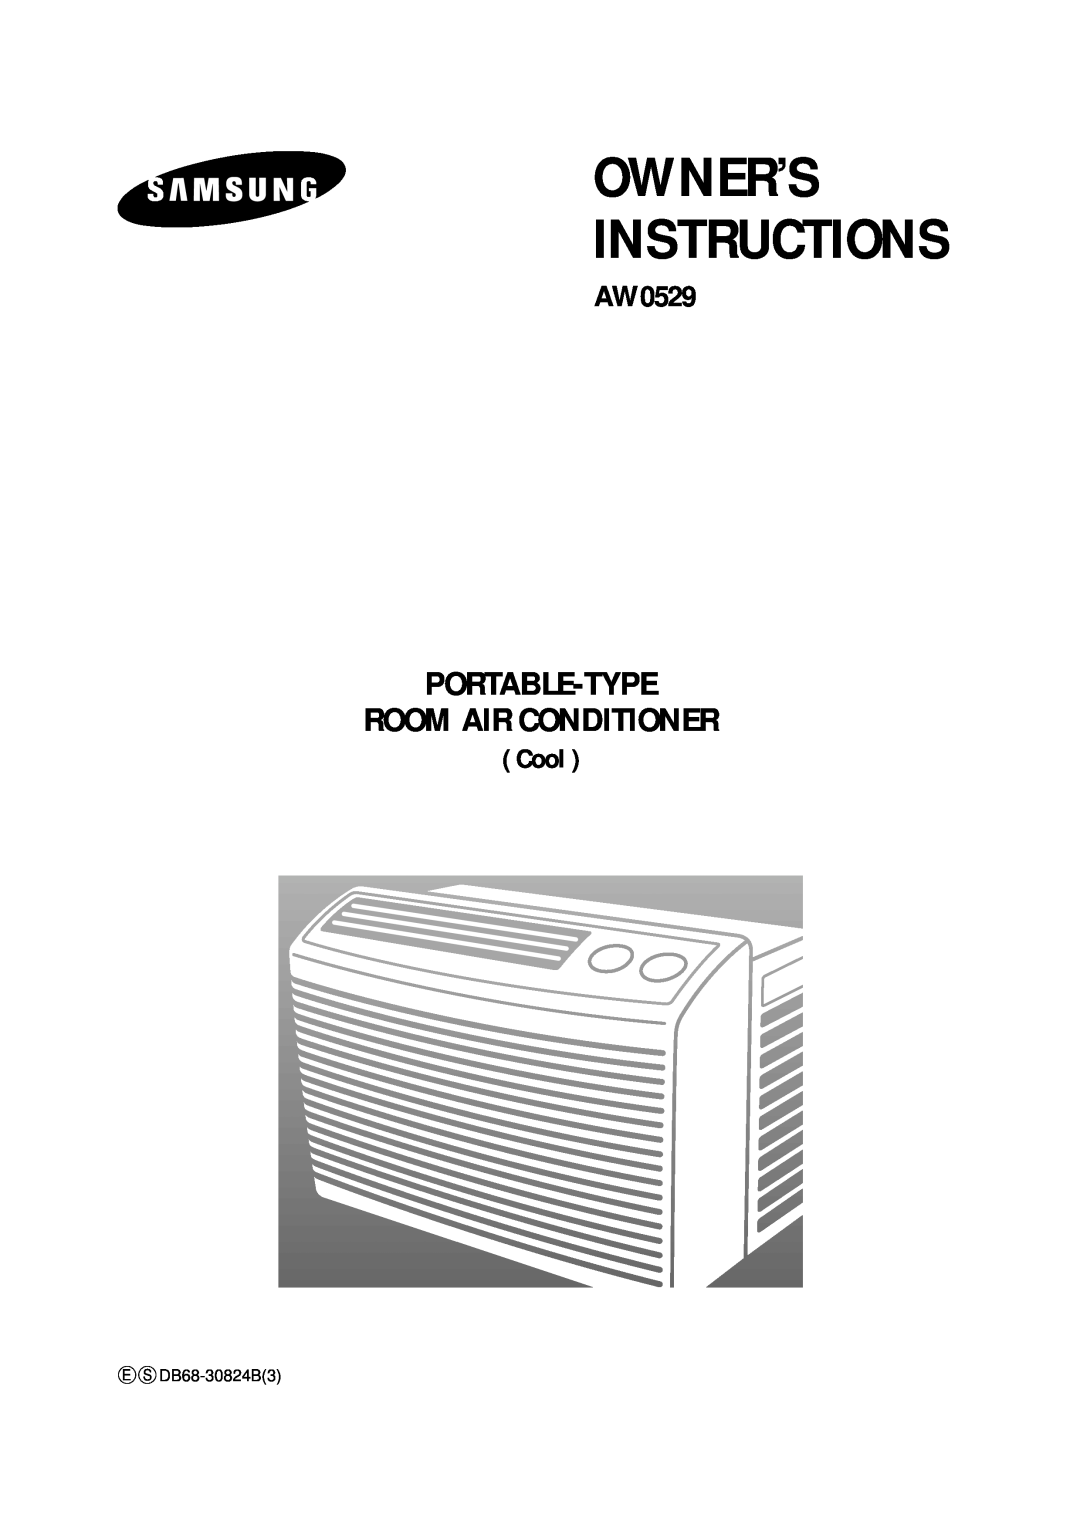 Samsung AW0529 manual E S DB68-30824B3, Owner’S Instructions, Portable-Type Room Air Conditioner, Cool 